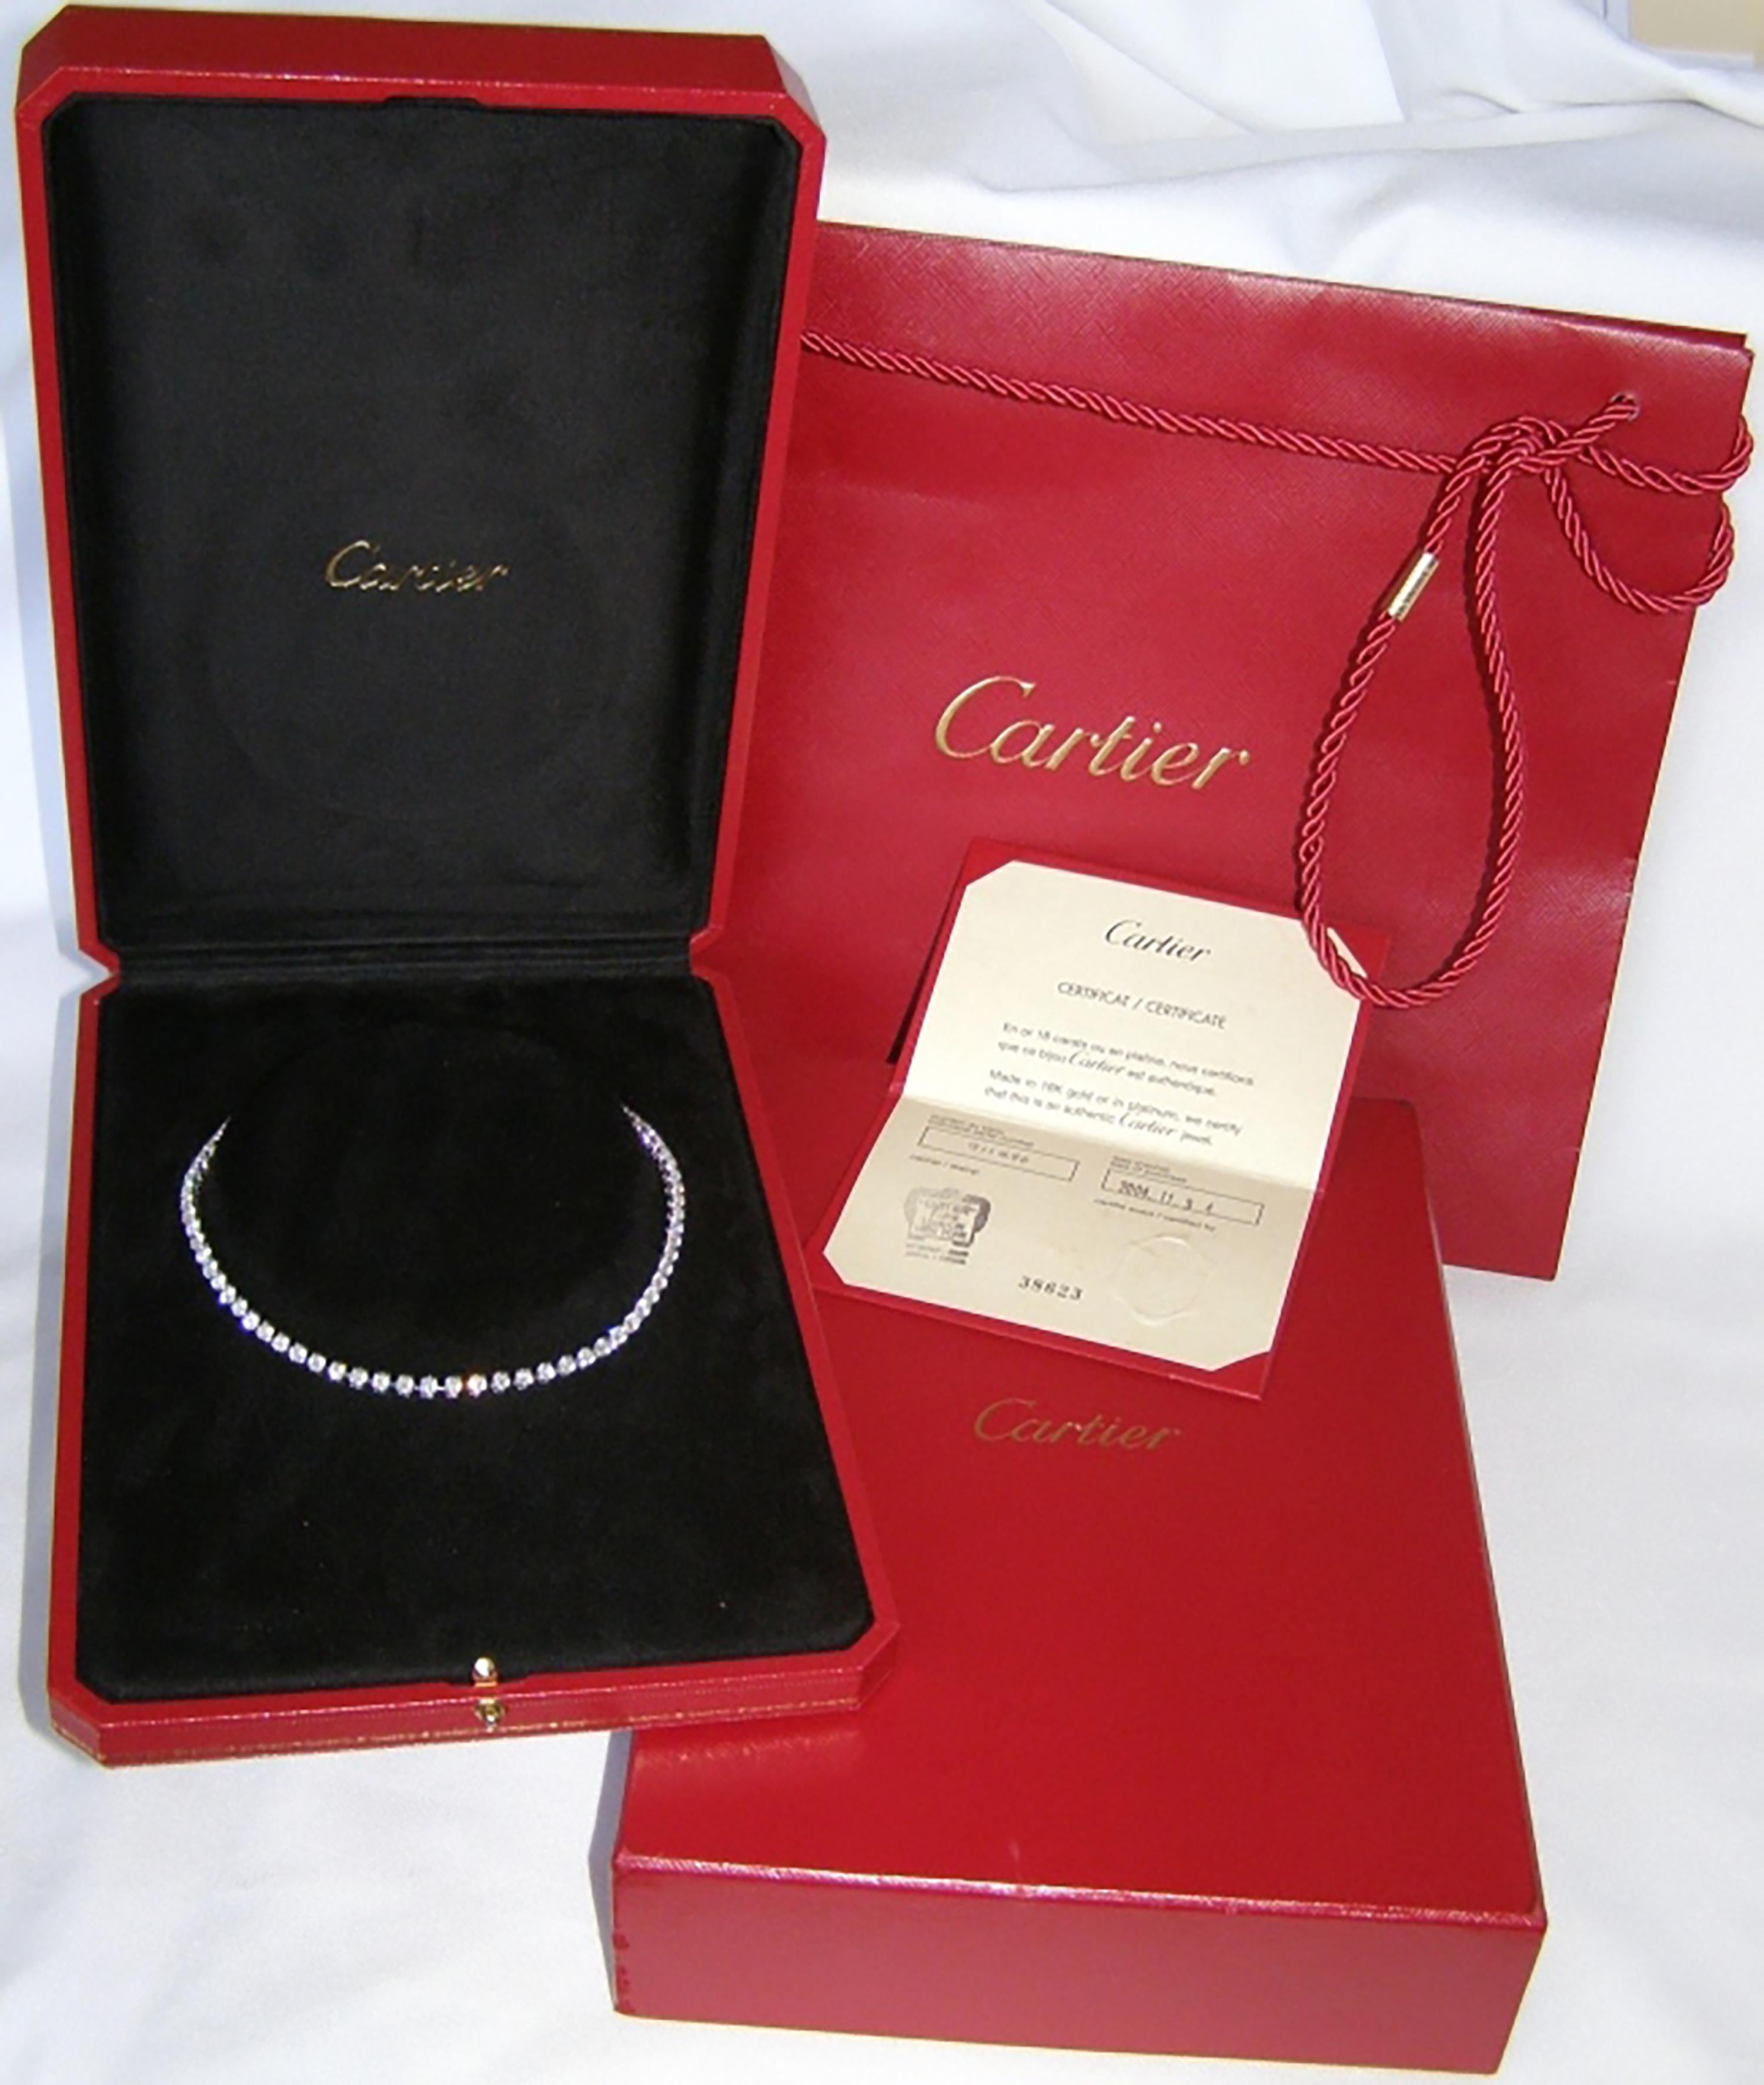 Cartier Platinum Diamond Tennis Line Necklace ~ 15.00tcw Diamonds ~ 75 Round brilliant Cut Diamonds ~ All Cartier Factory Diamonds ~ With Cartier Certificate of Authenticity From When Purchased New 2004.11.04 Cartier Platinum Diamond Tennis Line